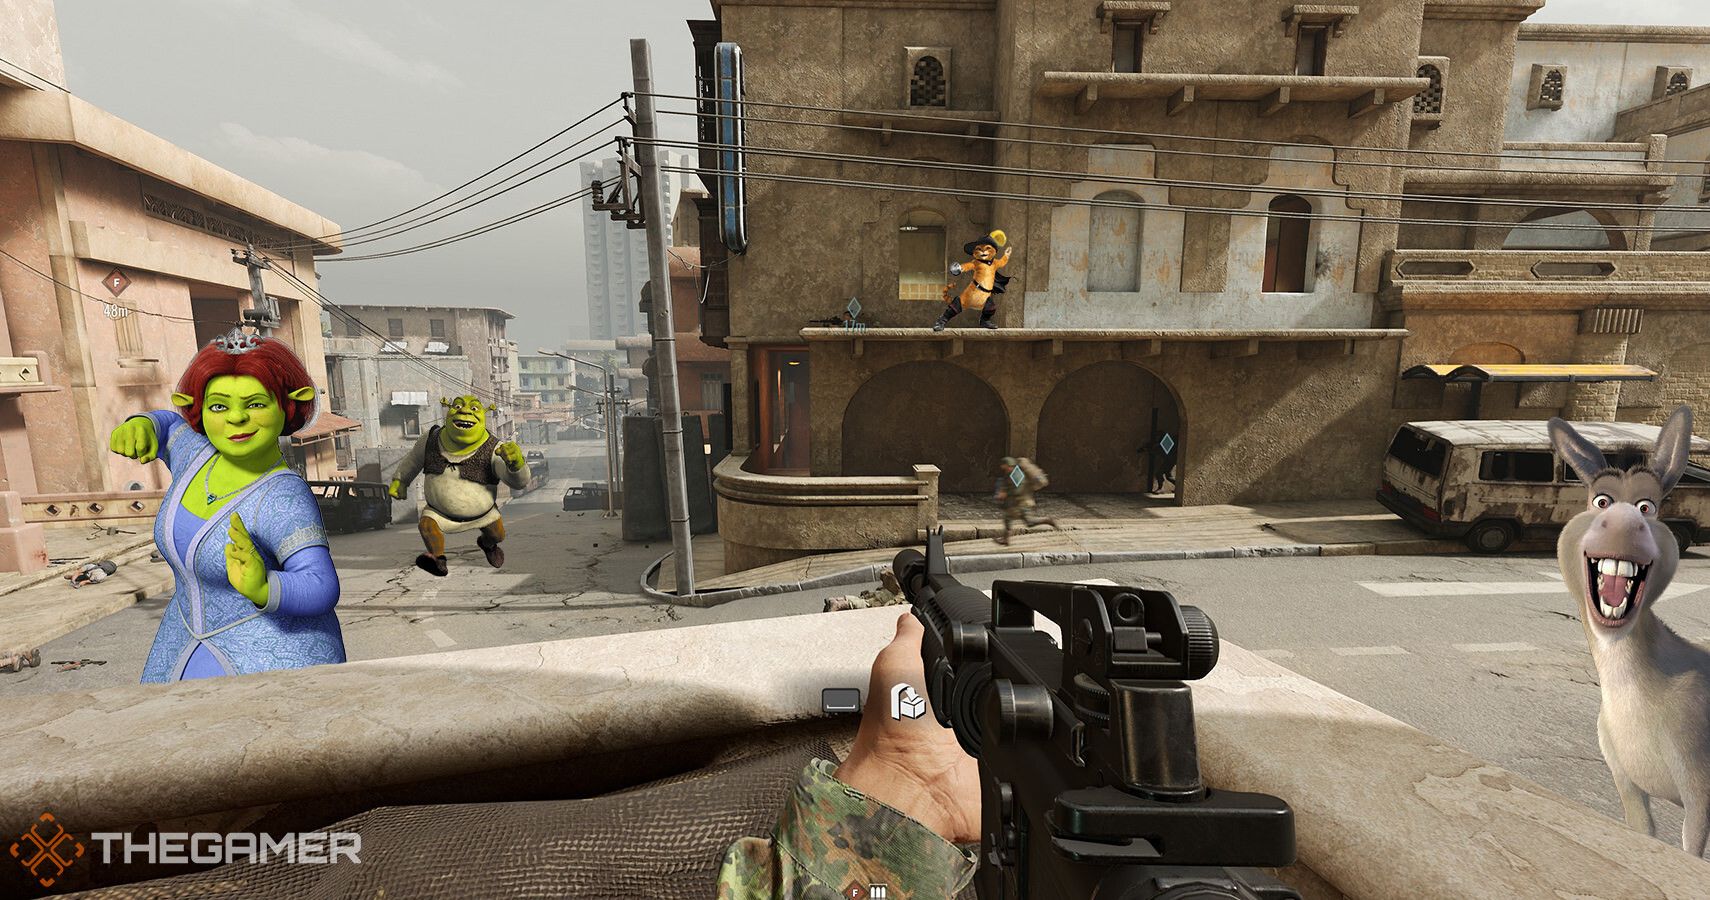 An Insurgency Player Changed Their Name To The Entire Shrek Script To Mess With Enemies